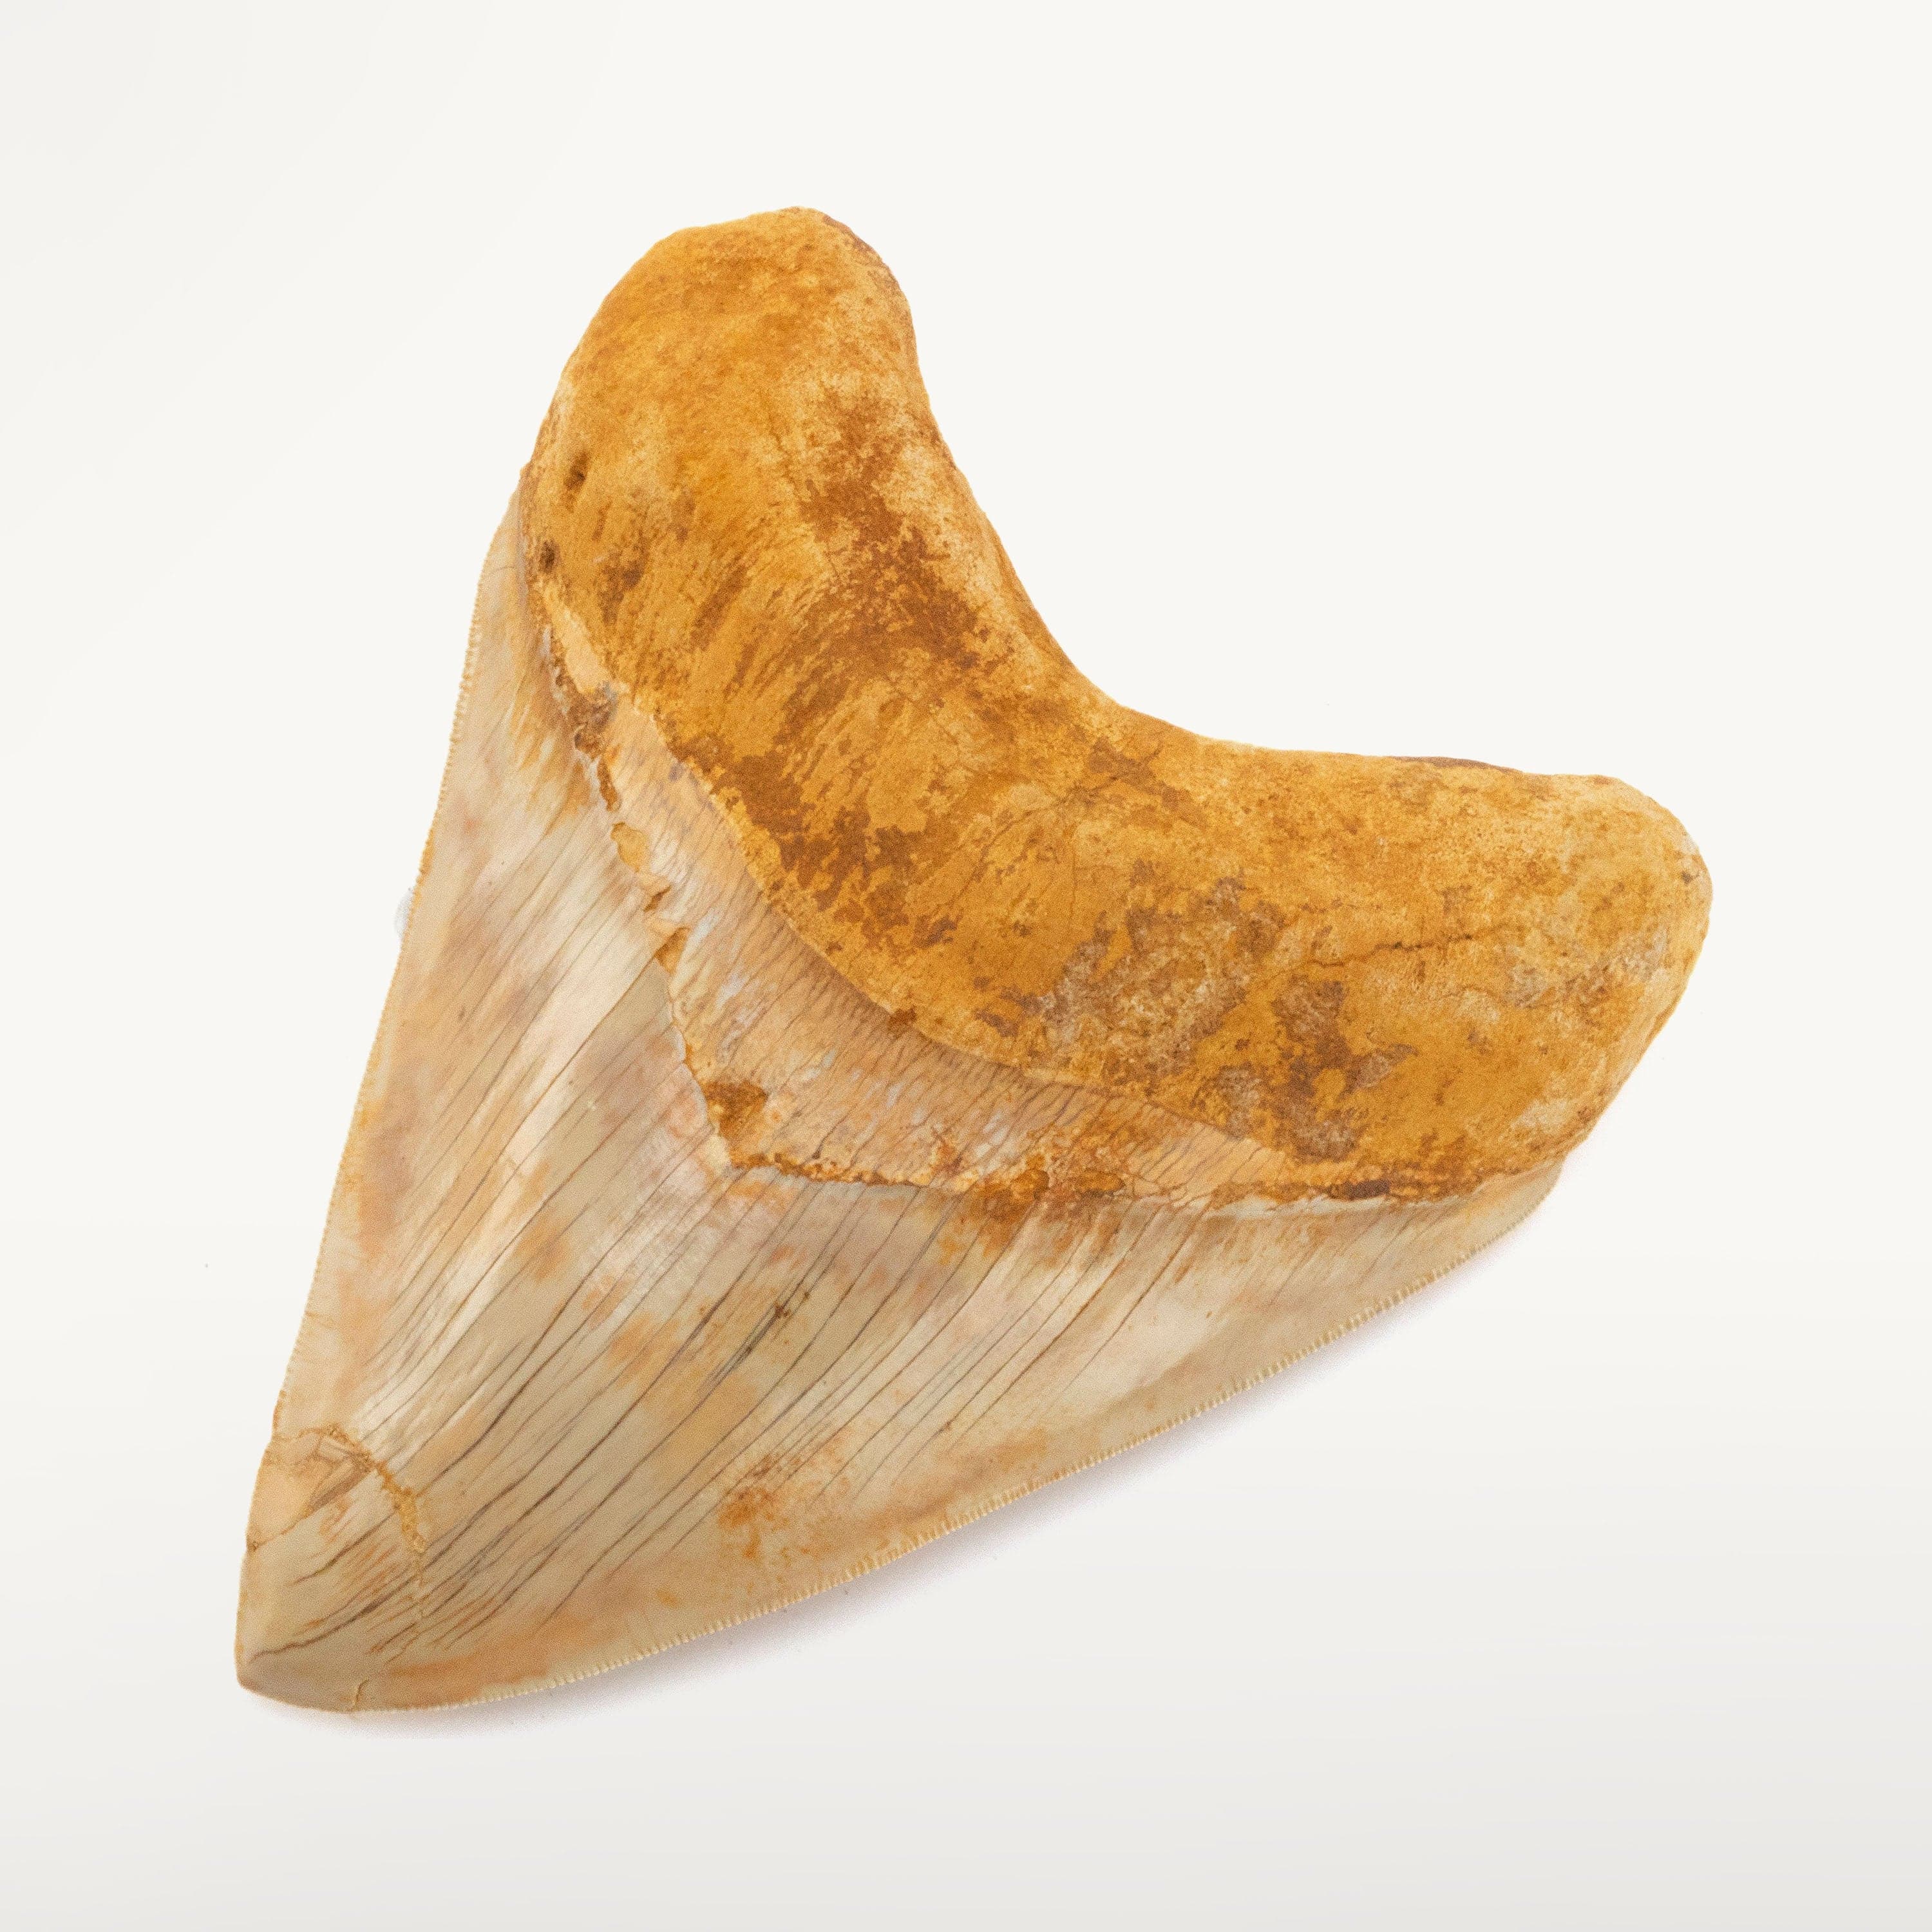 Kalifano Megalodon Teeth Natural Megalodon Tooth from Indonesia - 6" IST7200.009